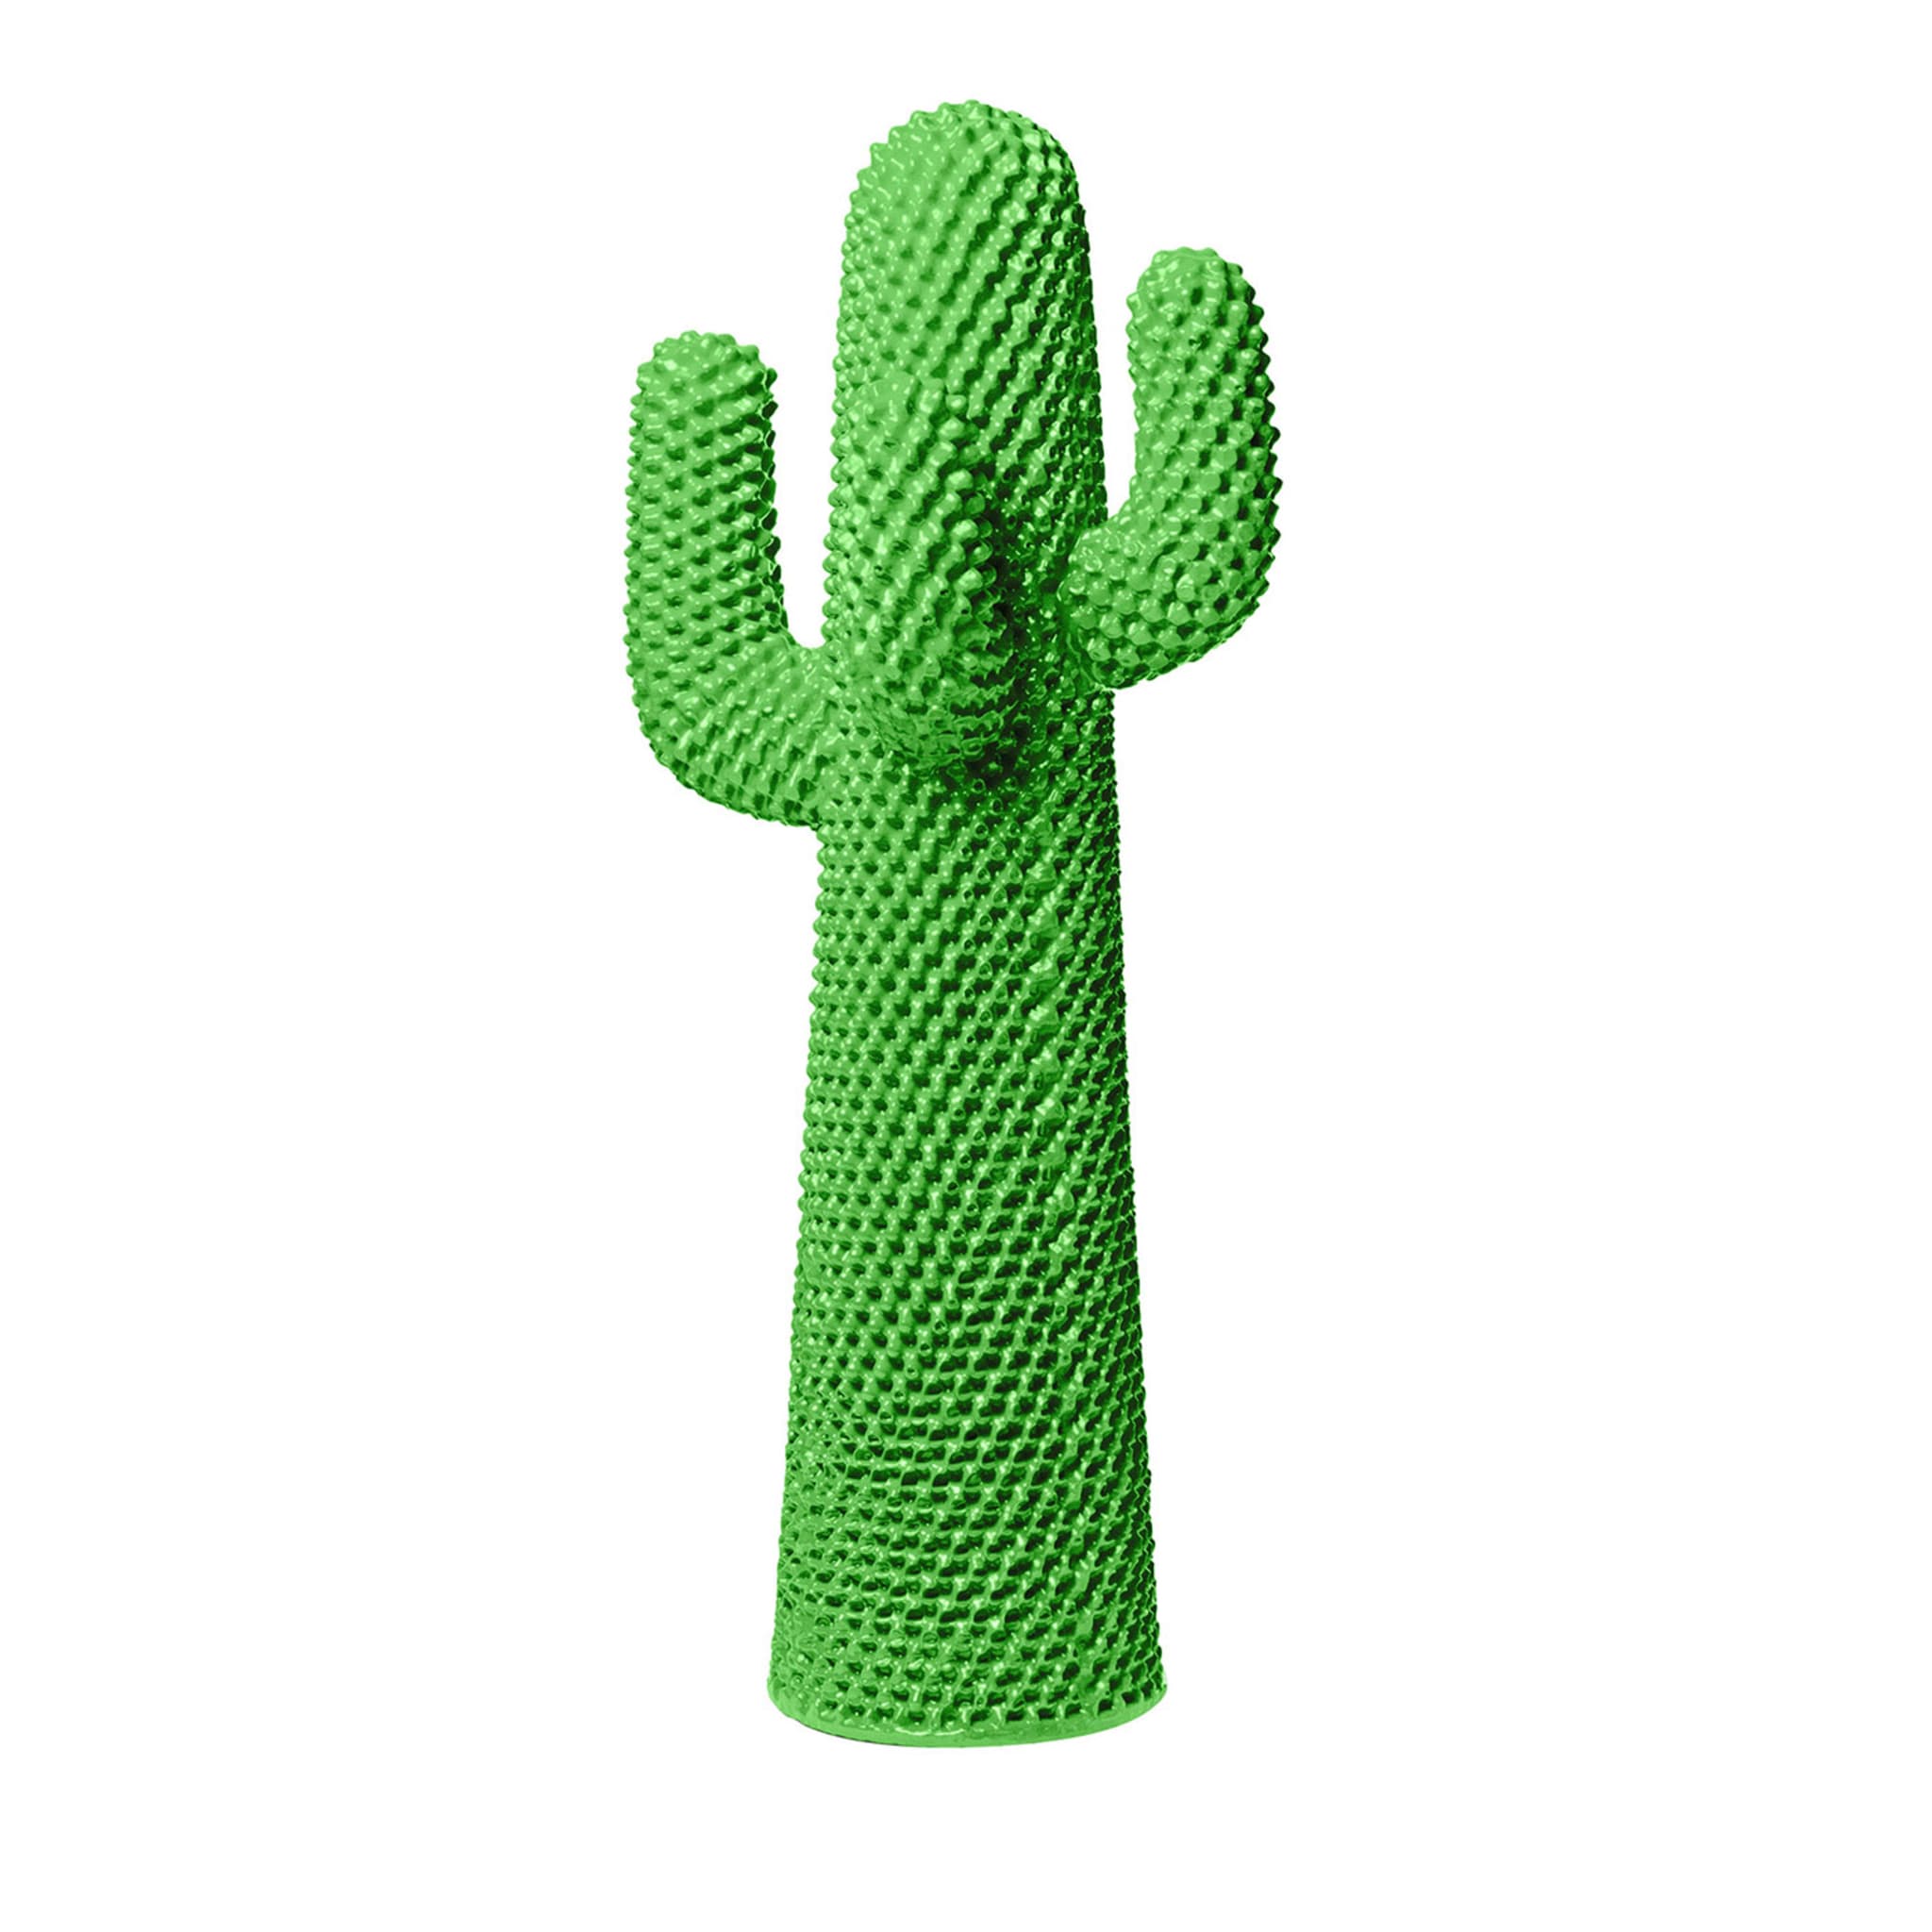 Another Green Cactus Coat Stand by Drocco/Mello - Main view